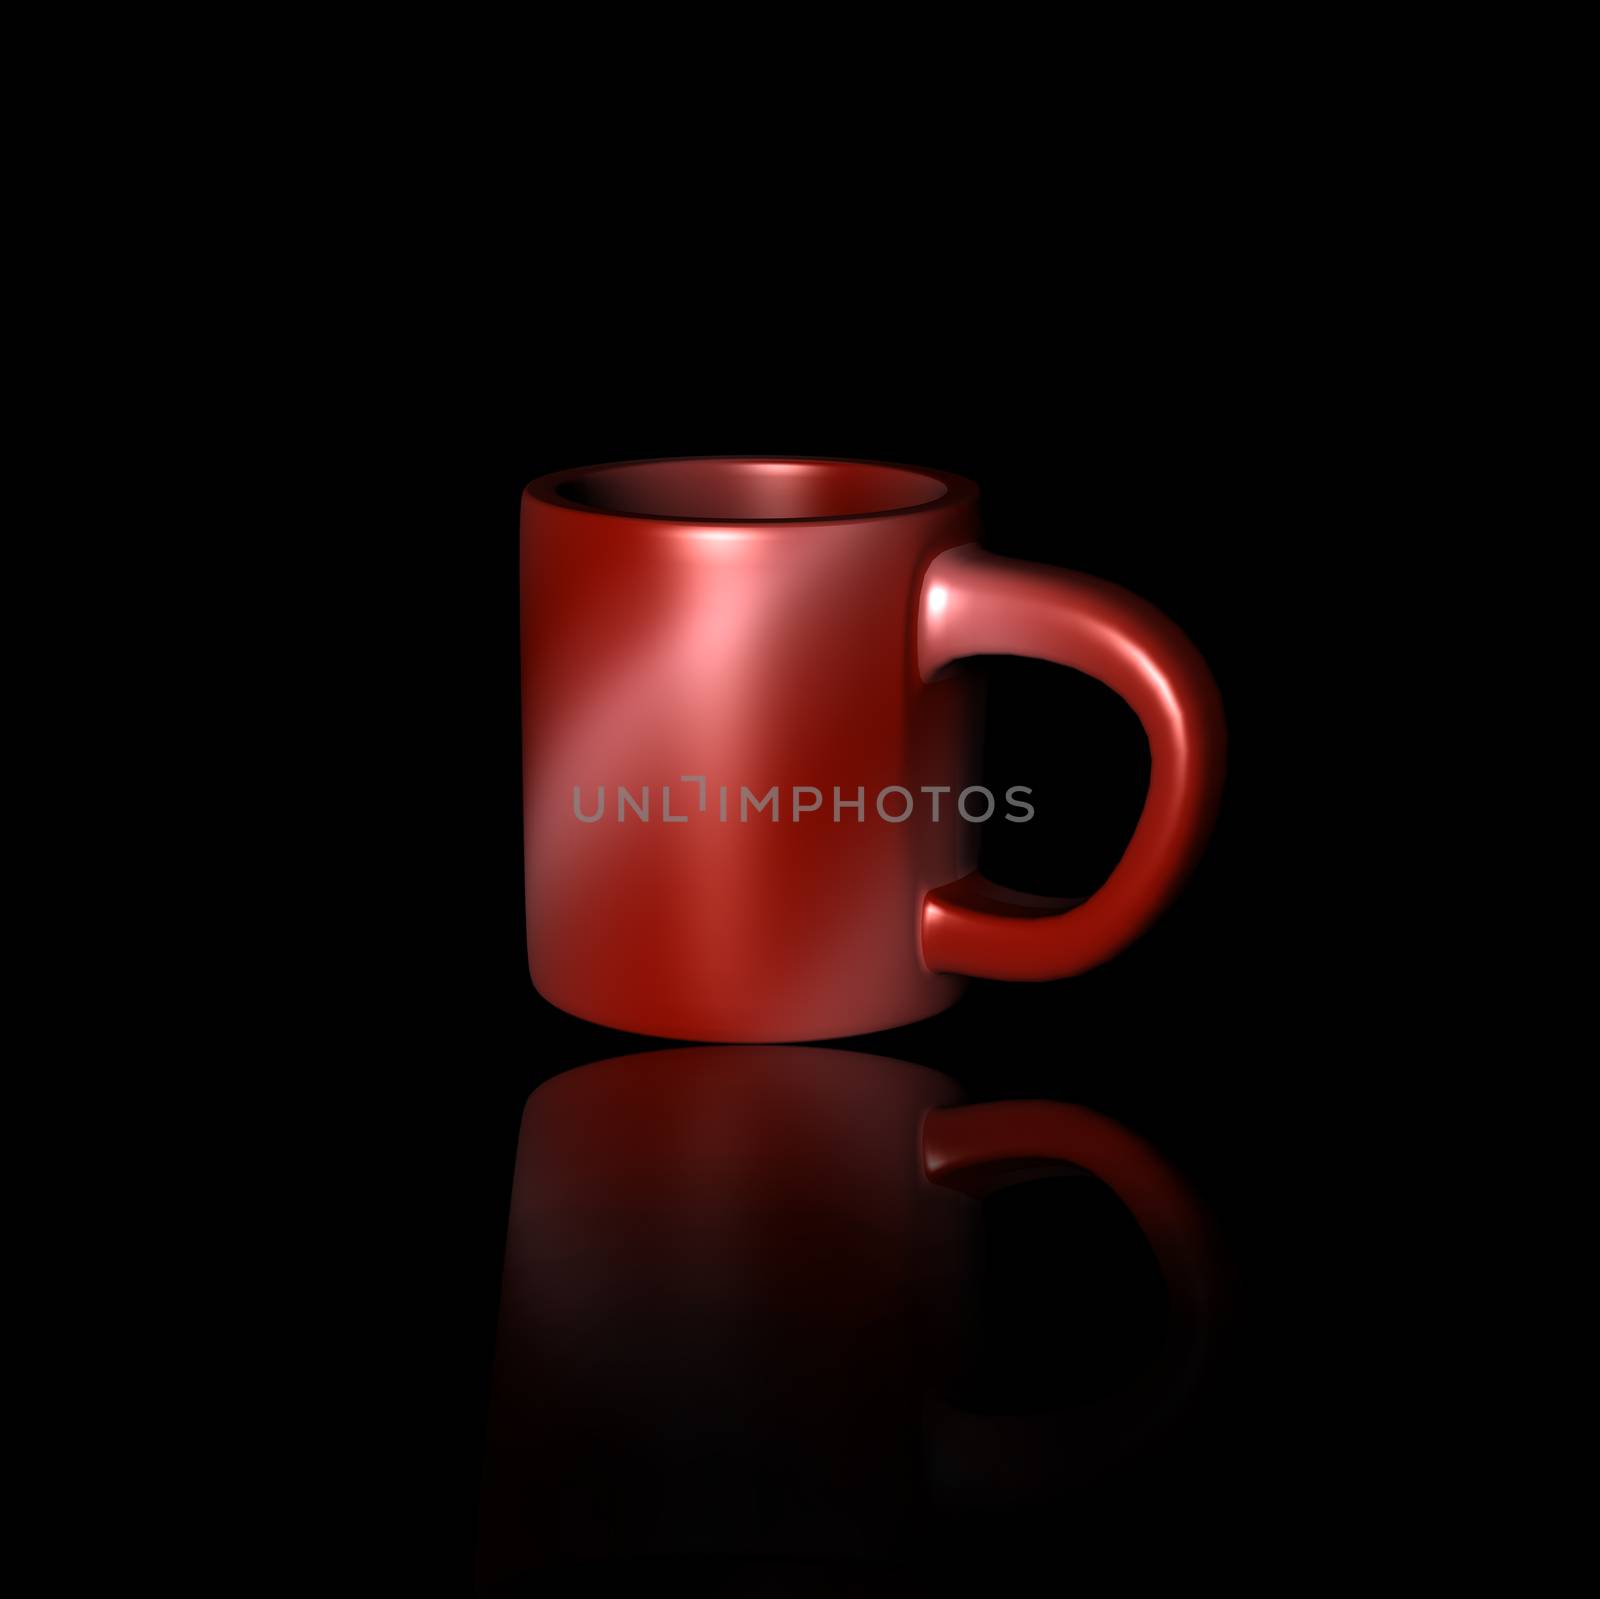 A Red cup at black background.